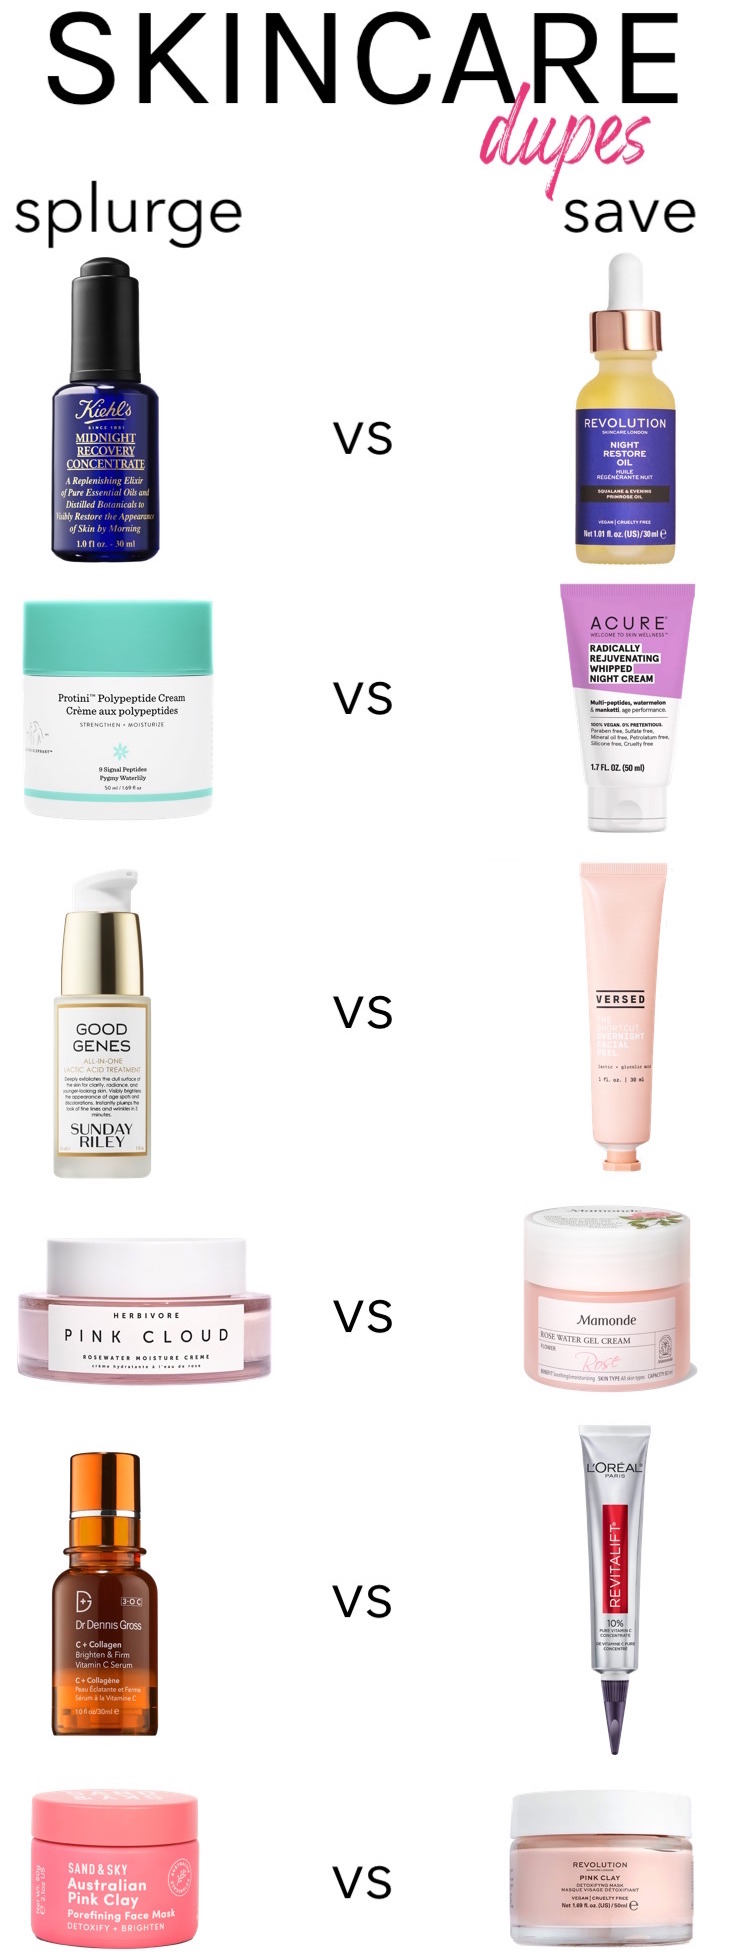 Skincare dupes for high-end products #drugstoredupes #skincaredupes #drugstoreskincare